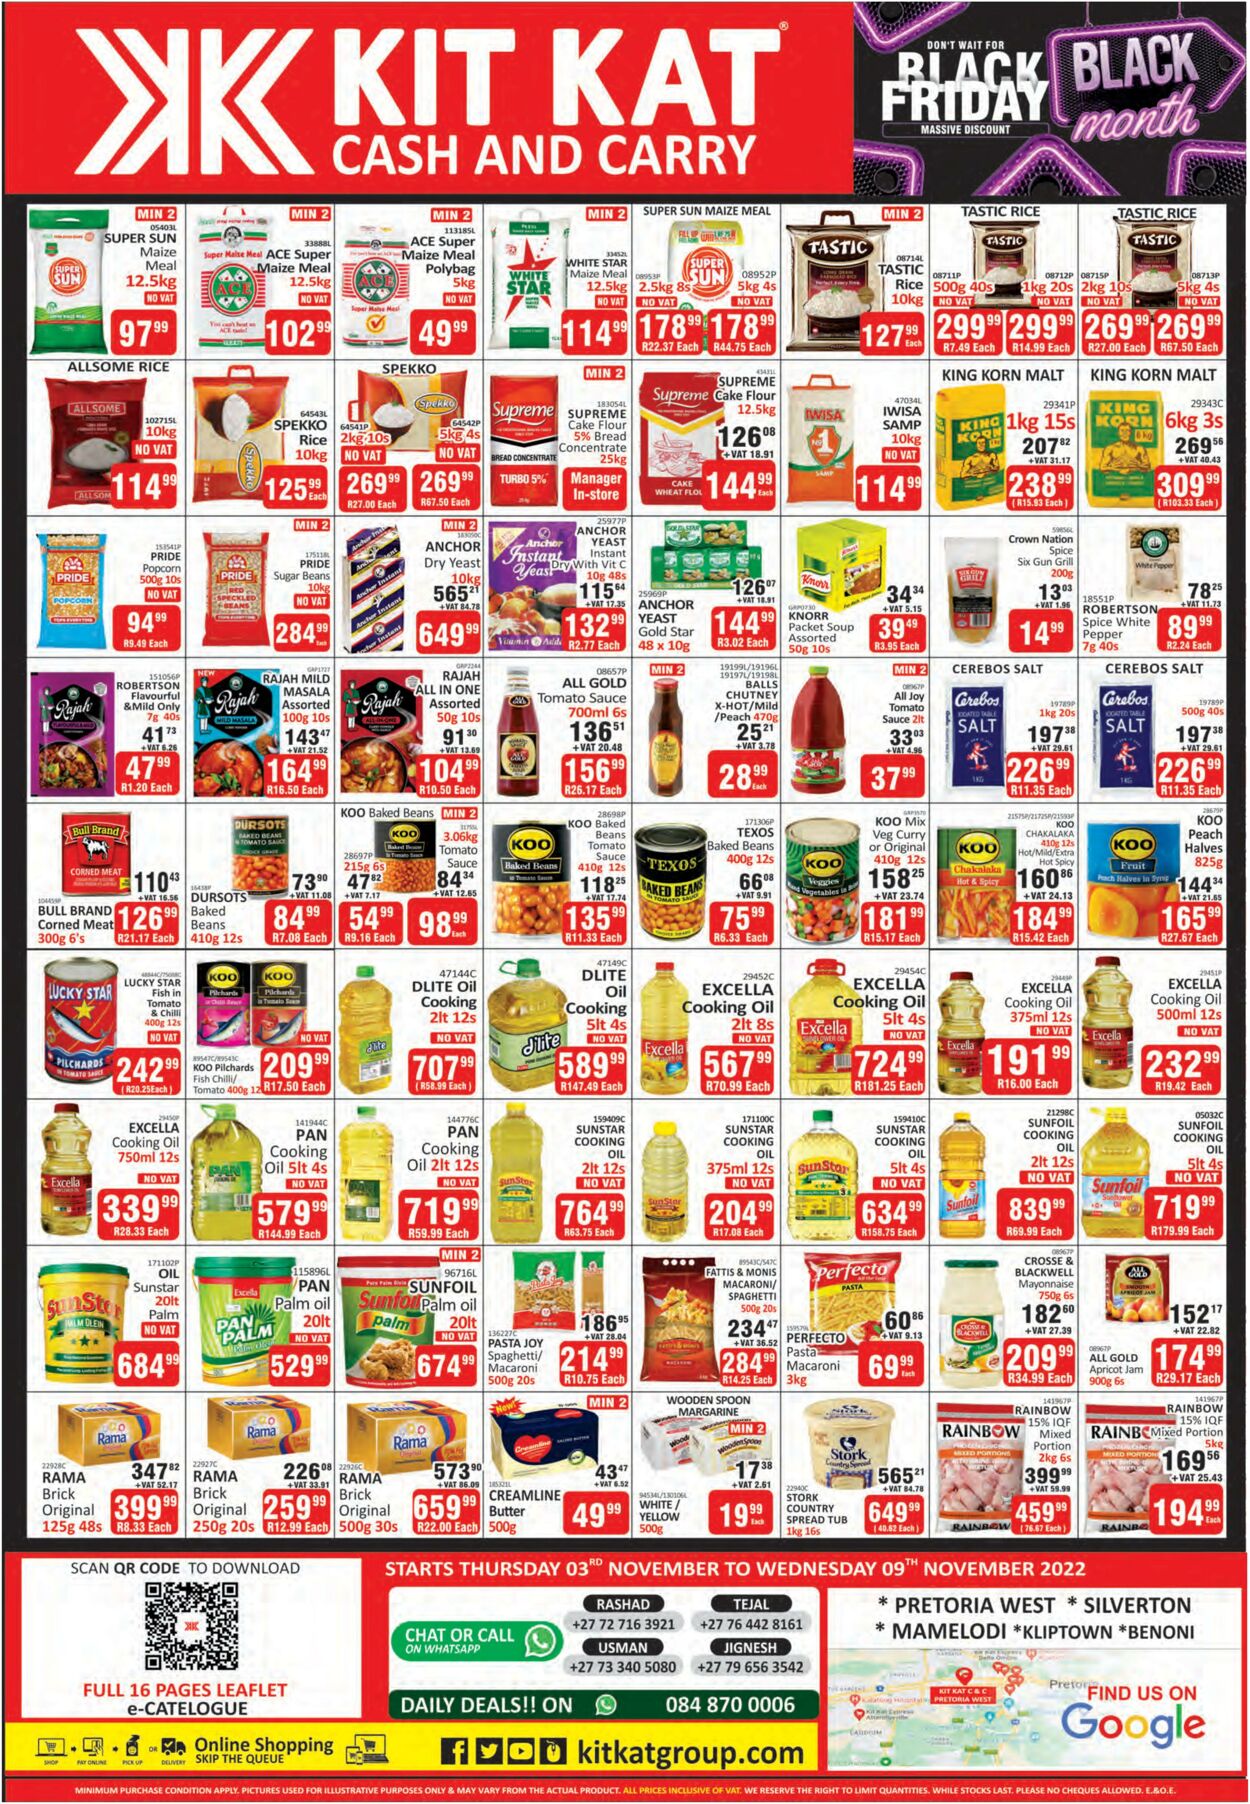 Special Kit Kat Cash and Carry 03.11.2022 - 09.11.2022